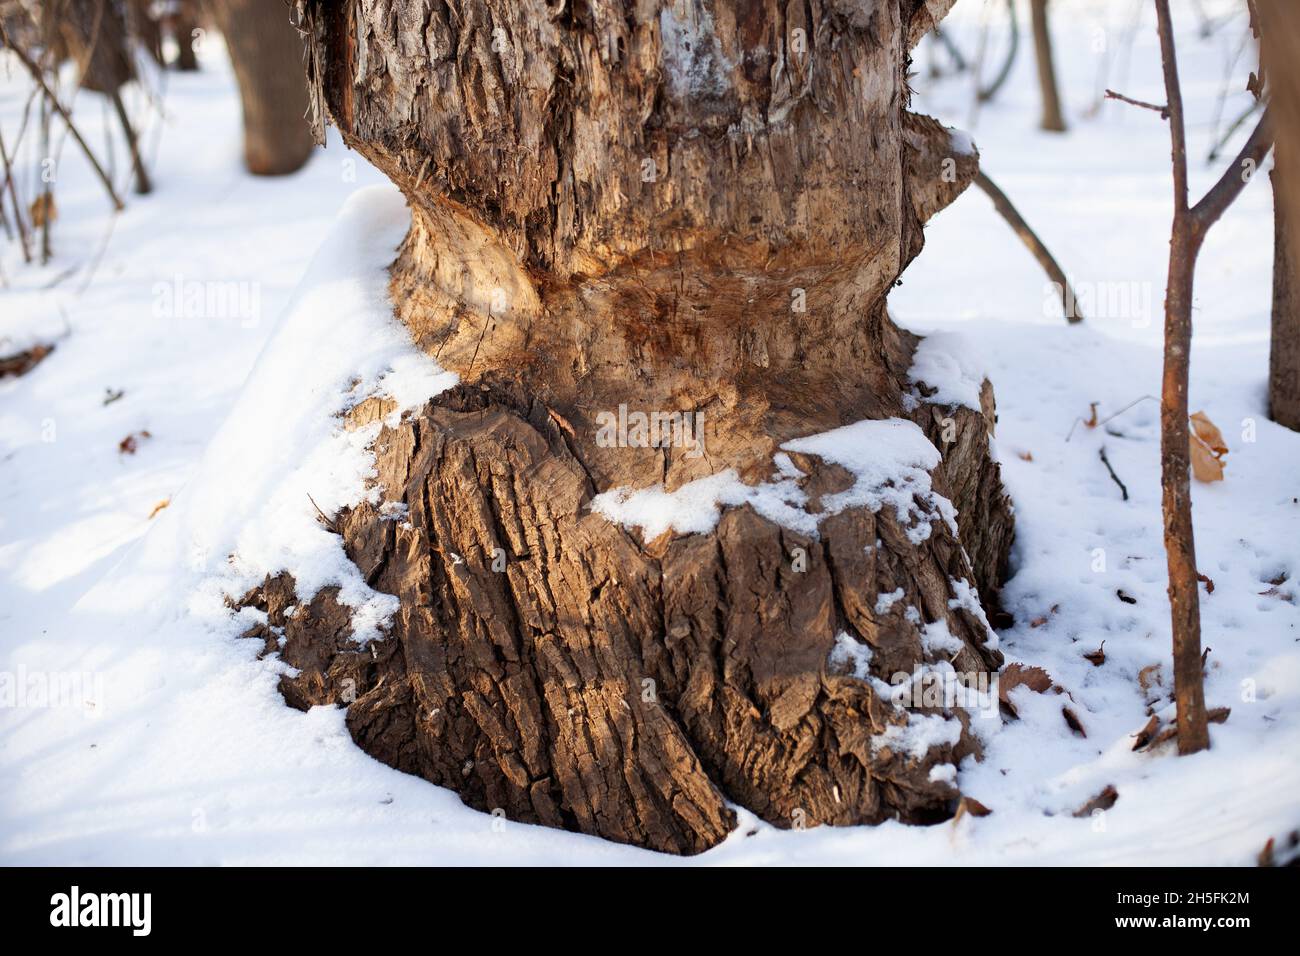 Old tree grows in winter forest. Close-up of tree trunk with marks from beaver teeth and covered with snow, winter landscape Stock Photo